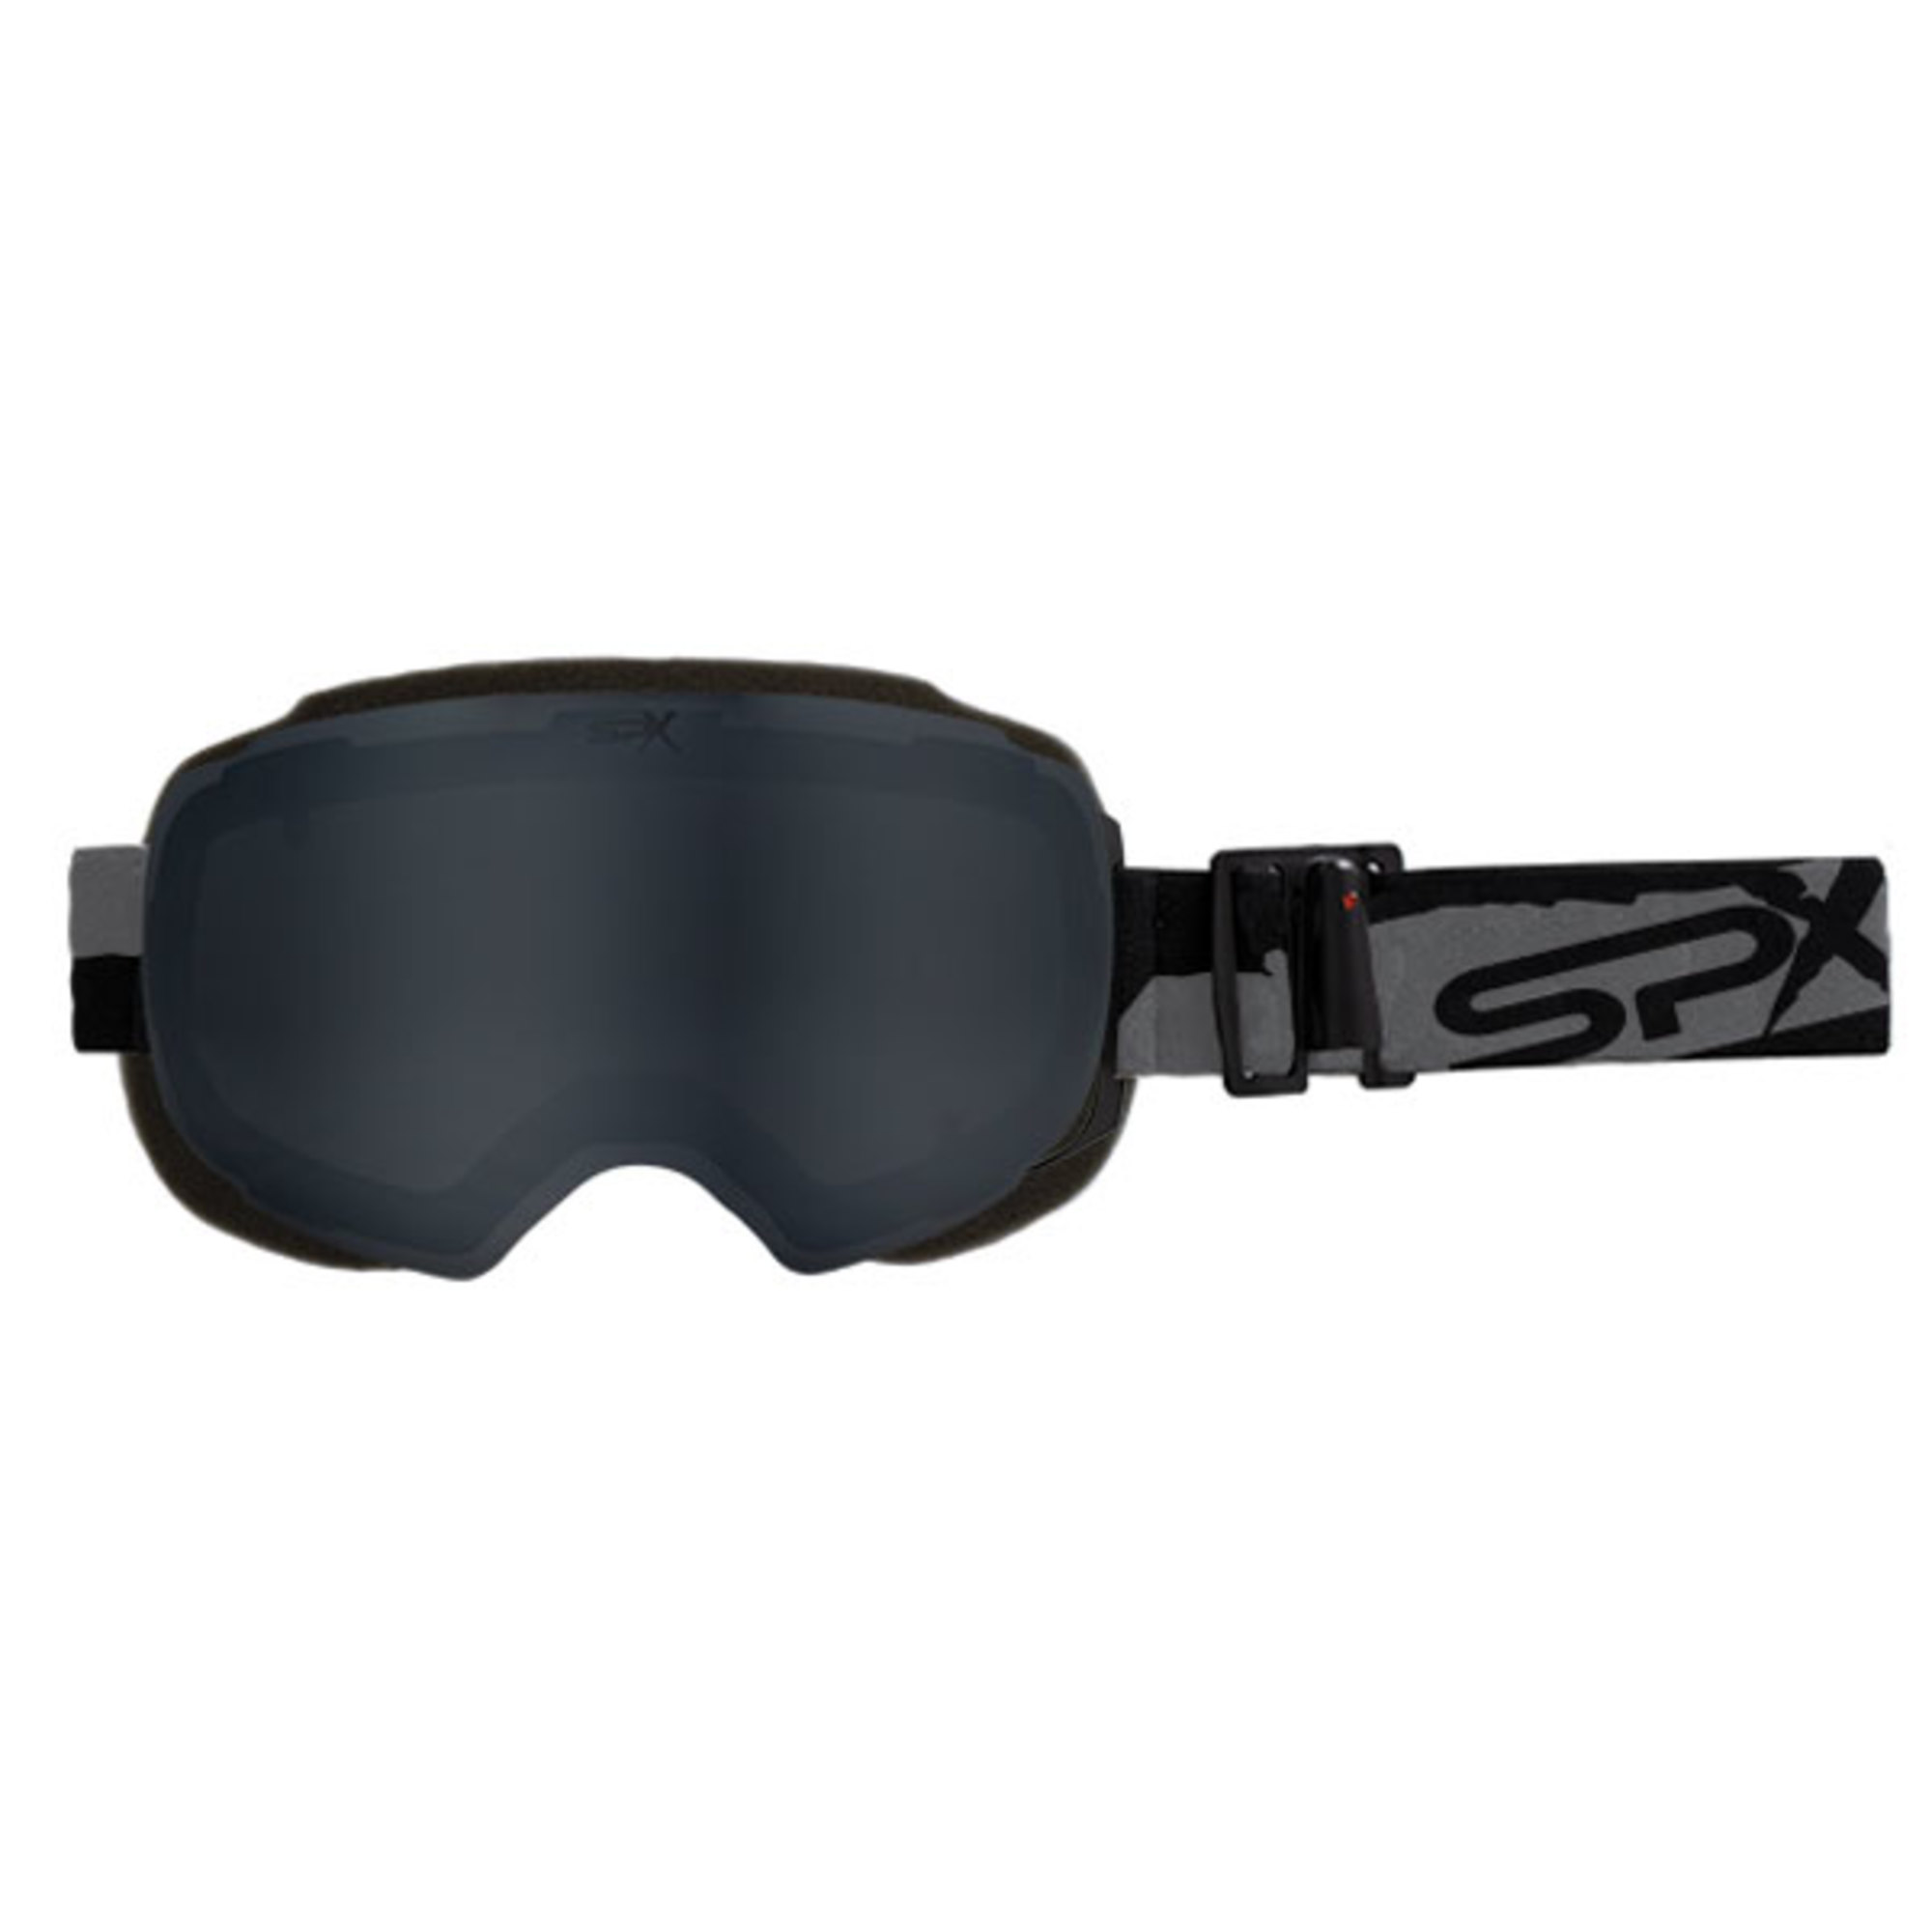 spx goggles lens adult magnetic heated snow